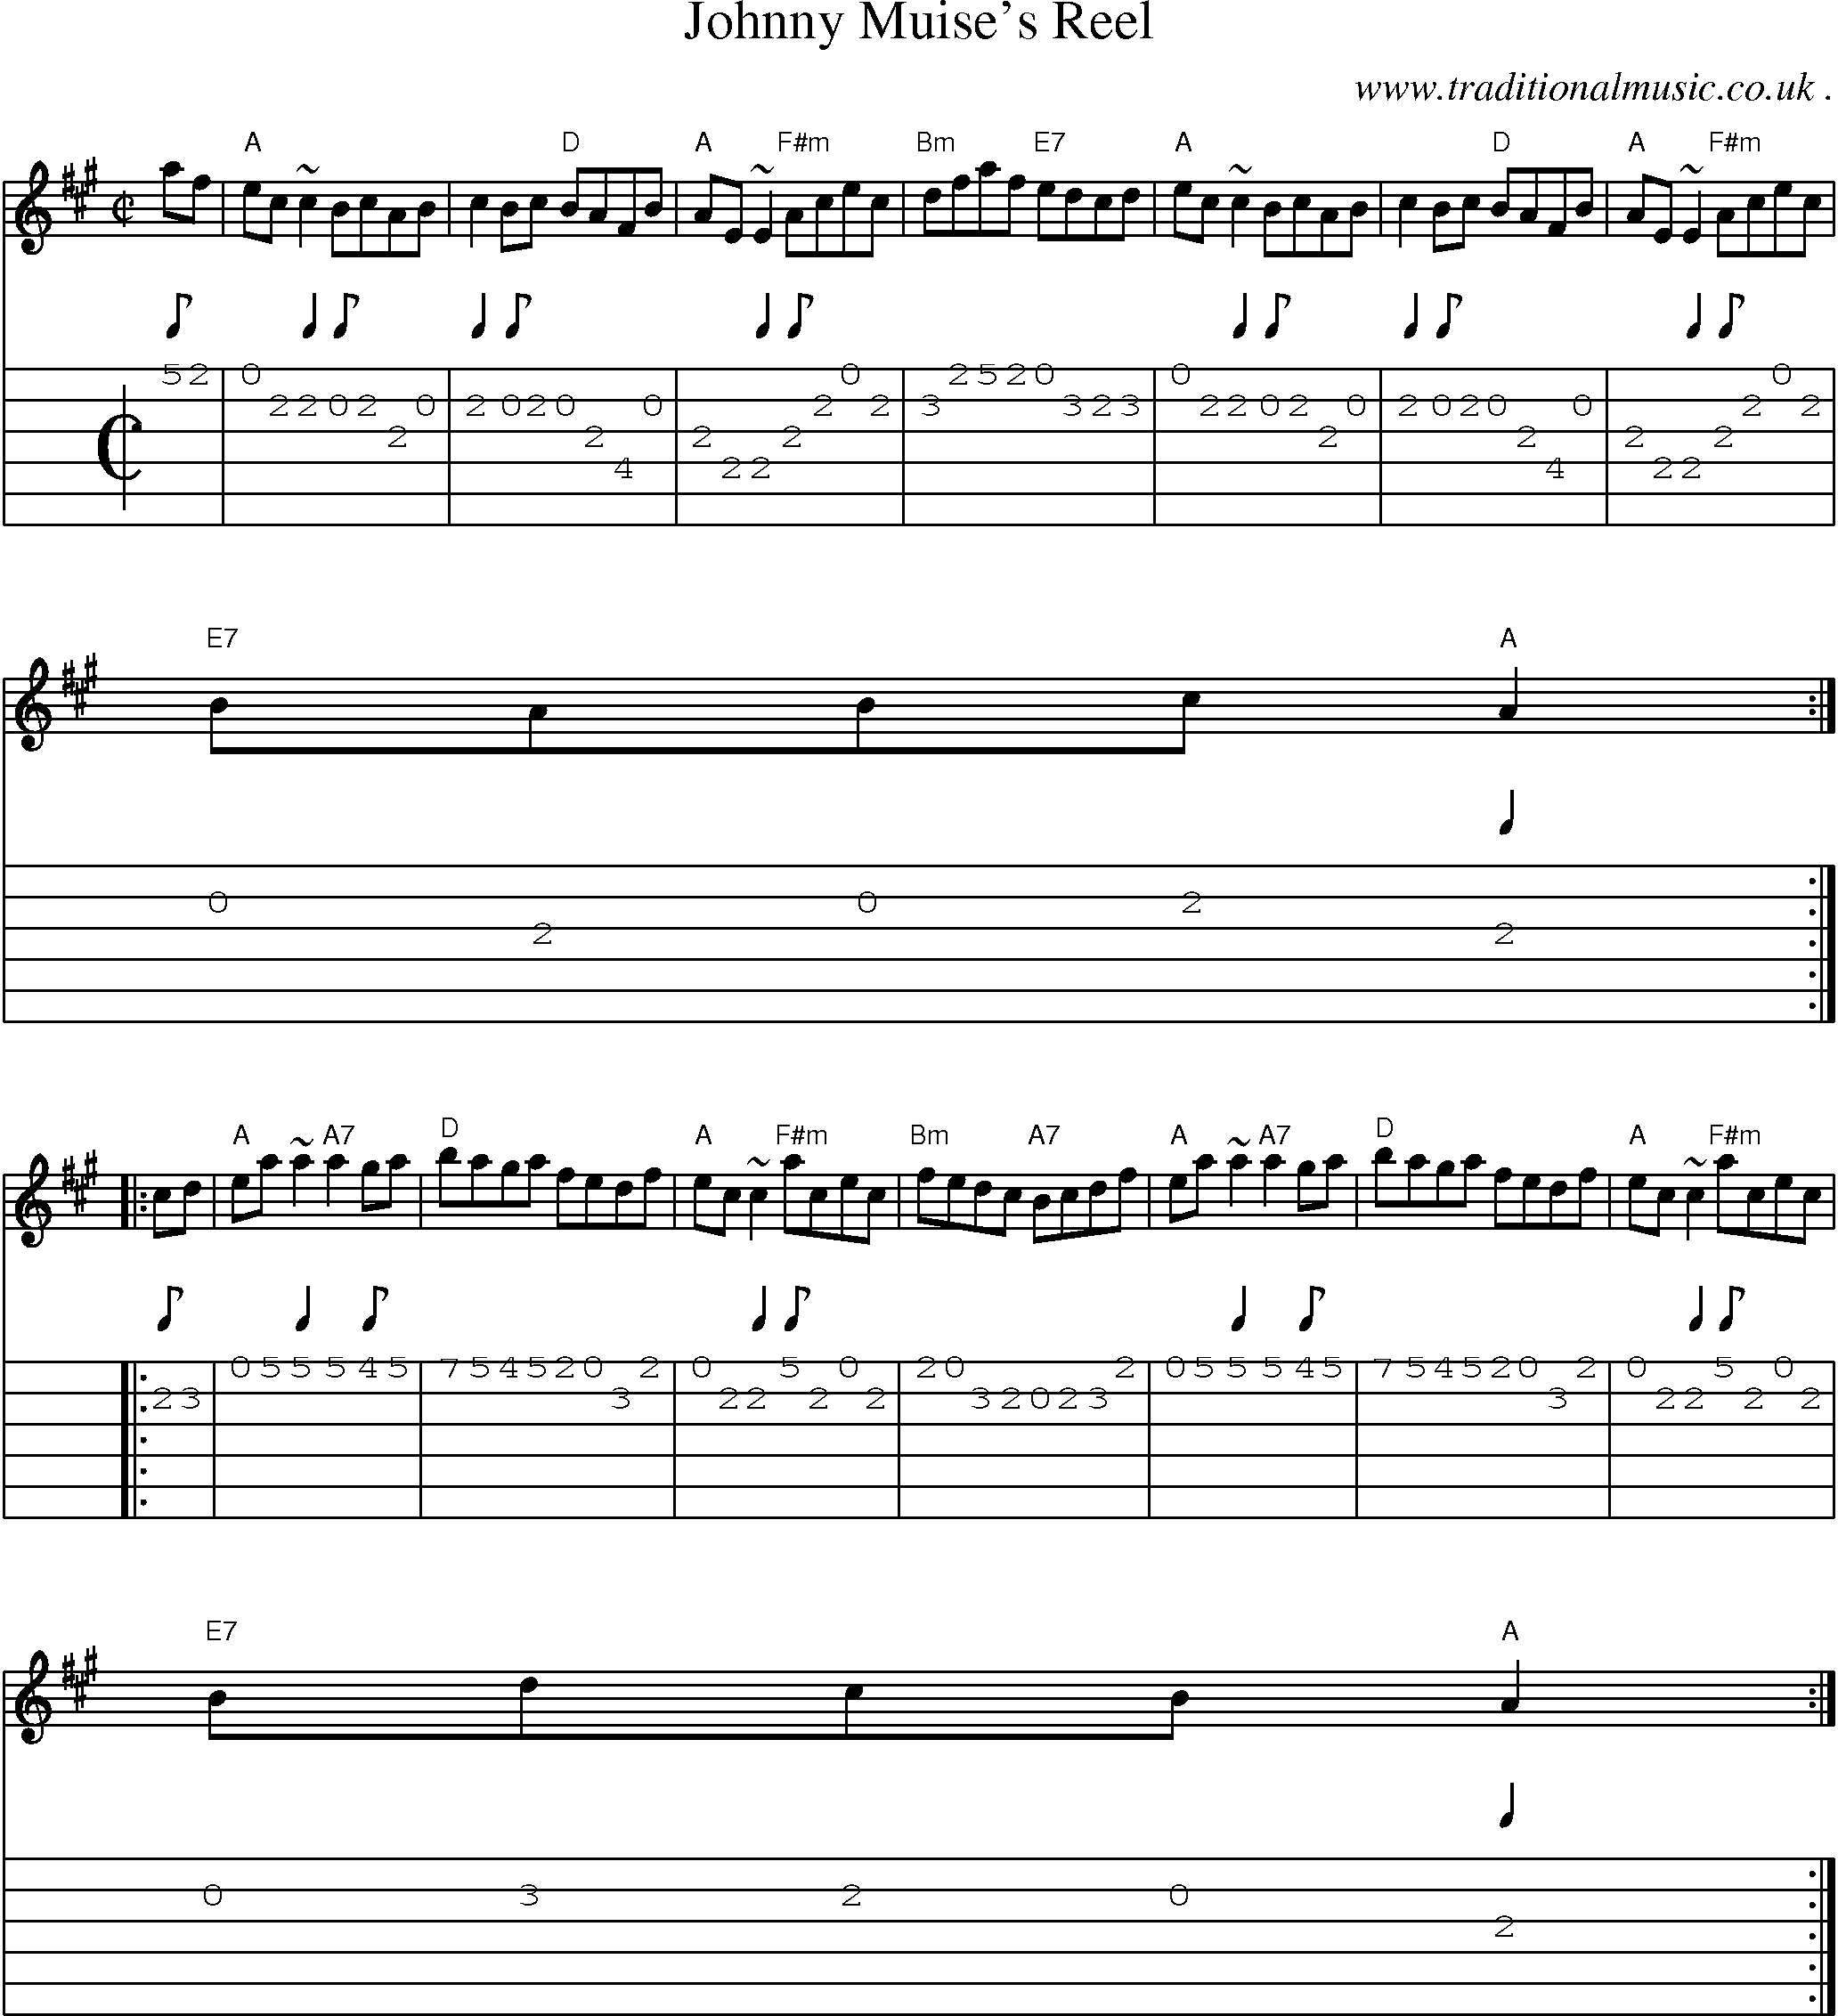 Sheet-music  score, Chords and Guitar Tabs for Johnny Muises Reel